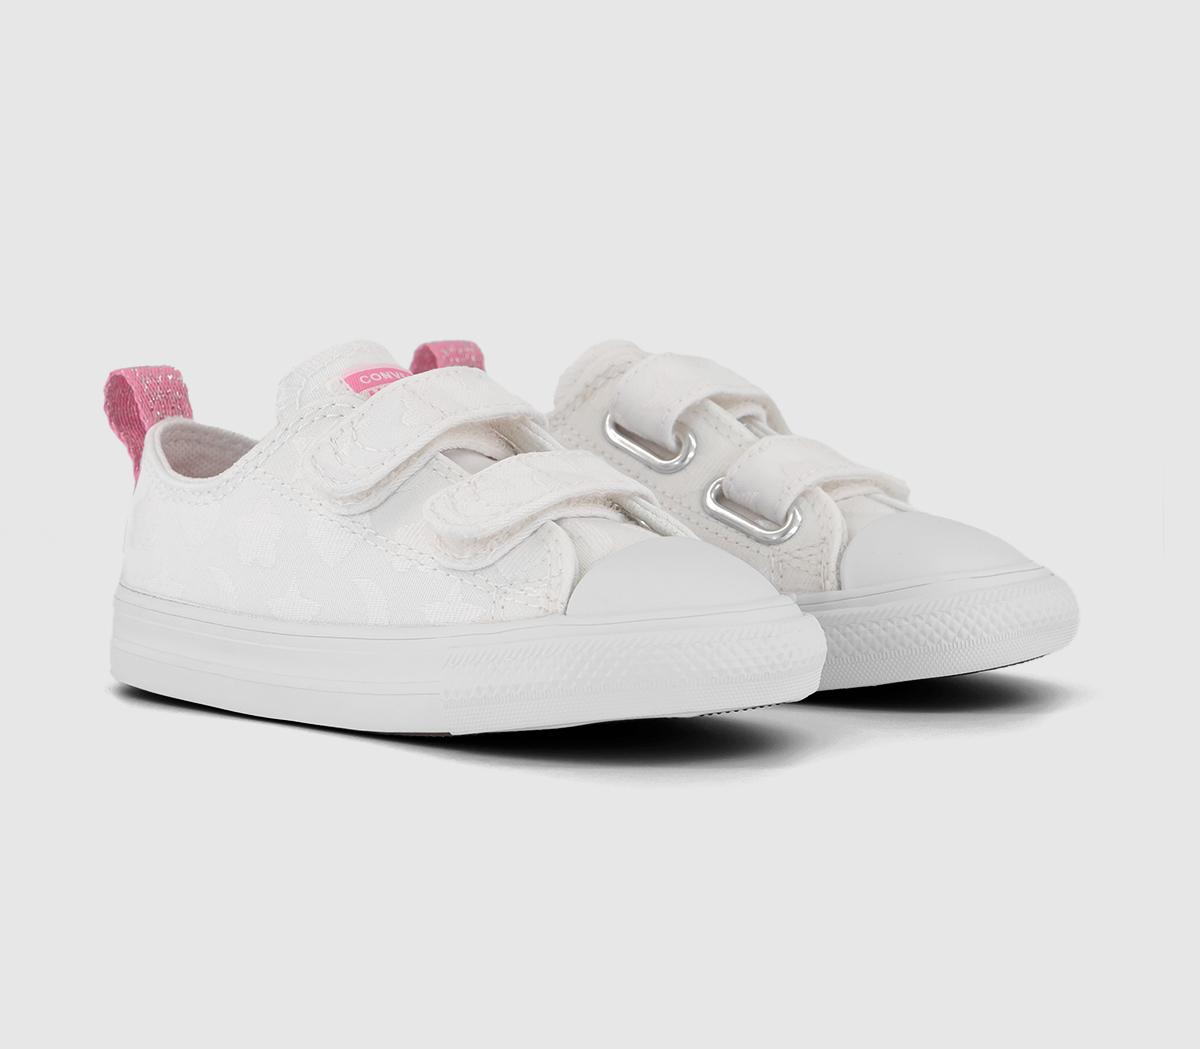 Converse Kids All Star 2vlace Trainers White Oops Pink, 5infant